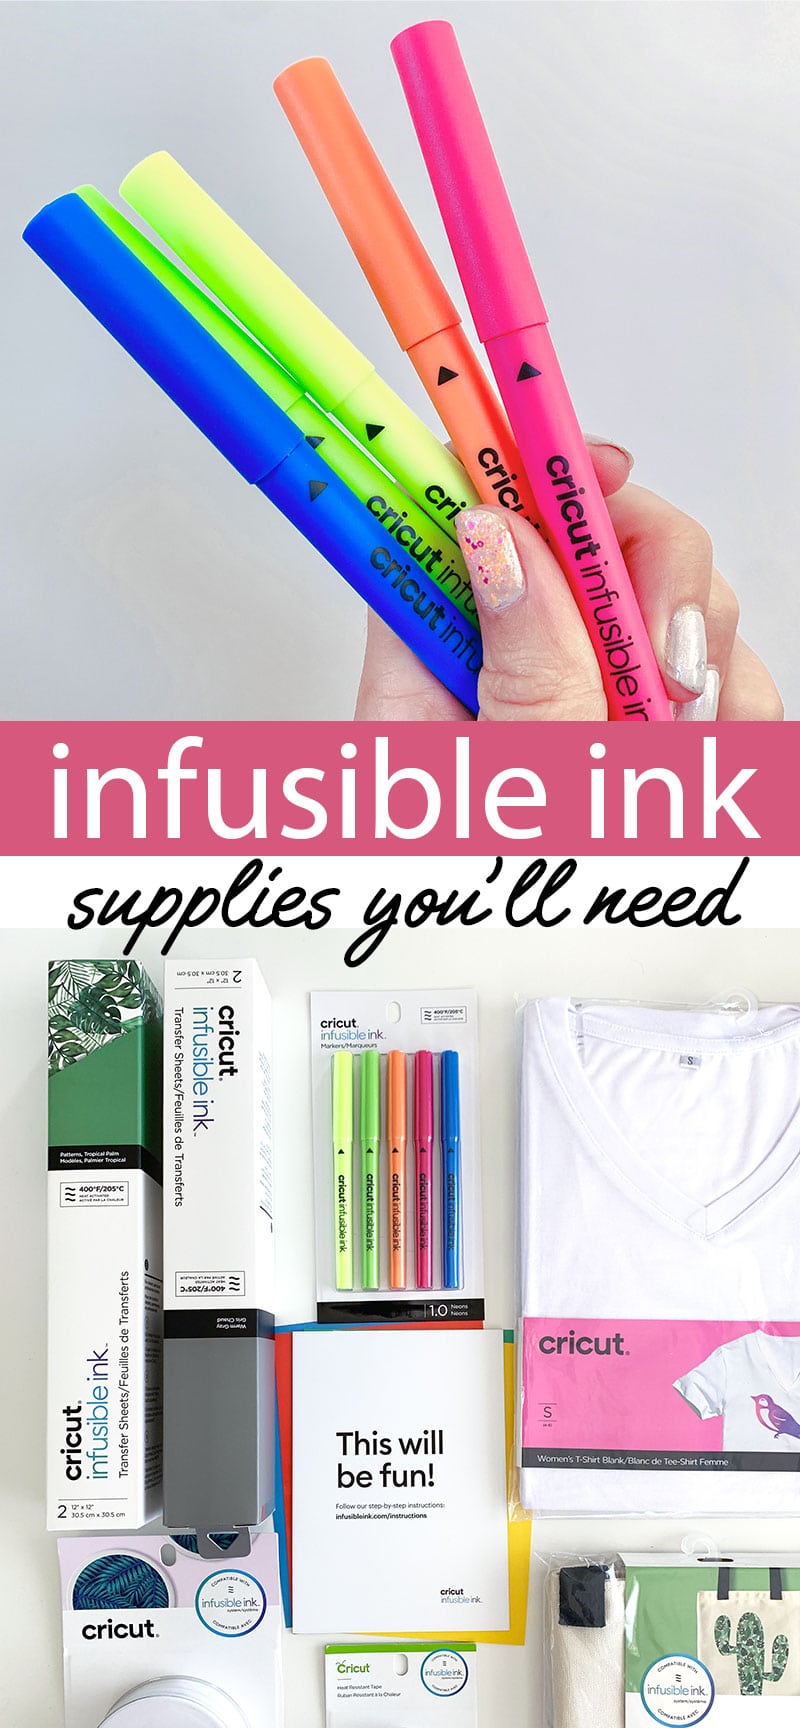 How to Use Cricut Infusible Ink Pens!